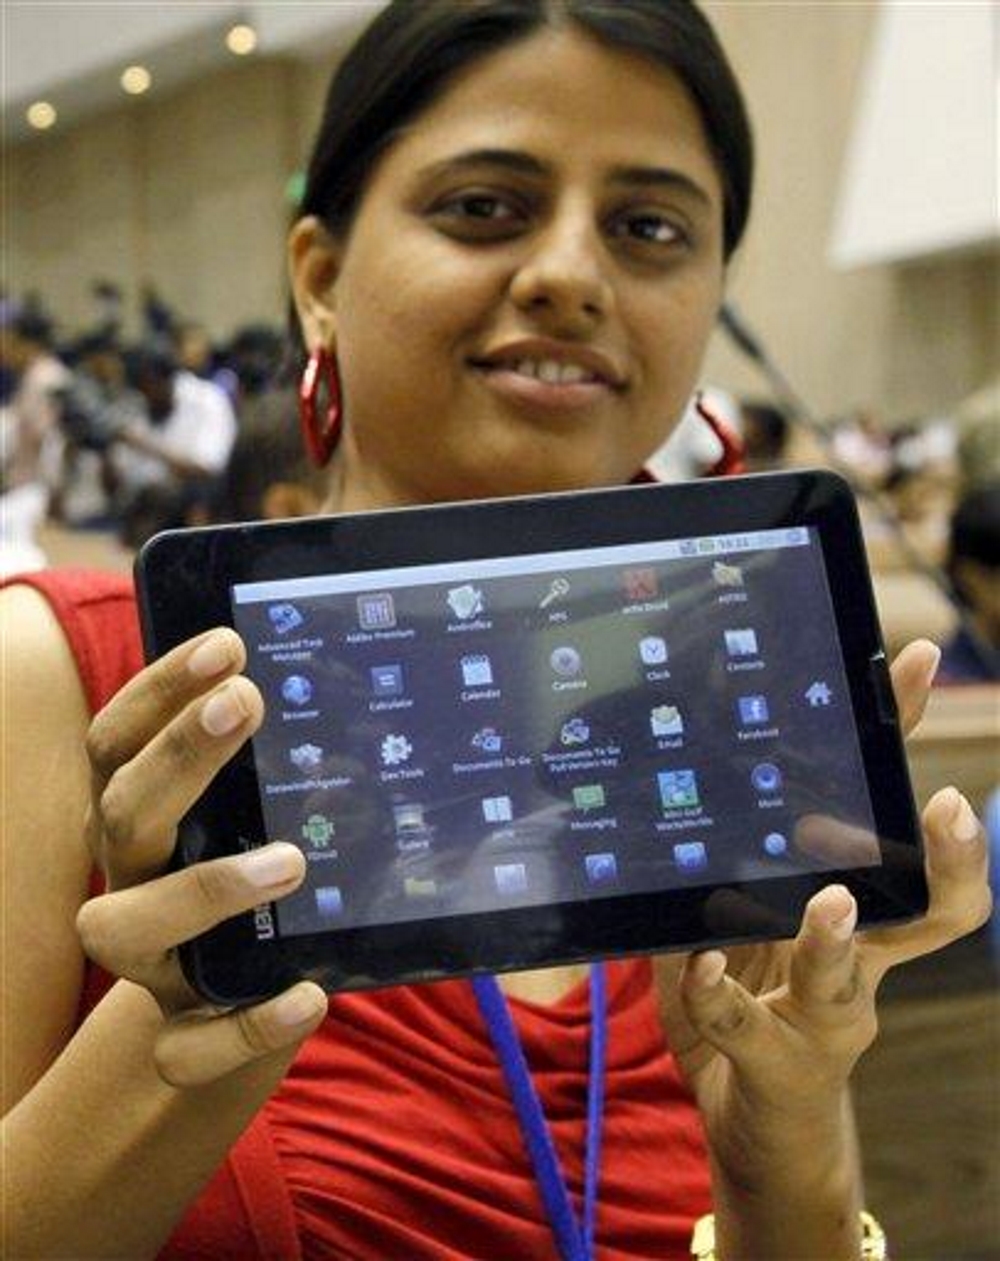 A super cheap Indian tablet computer device, priced at circa $35